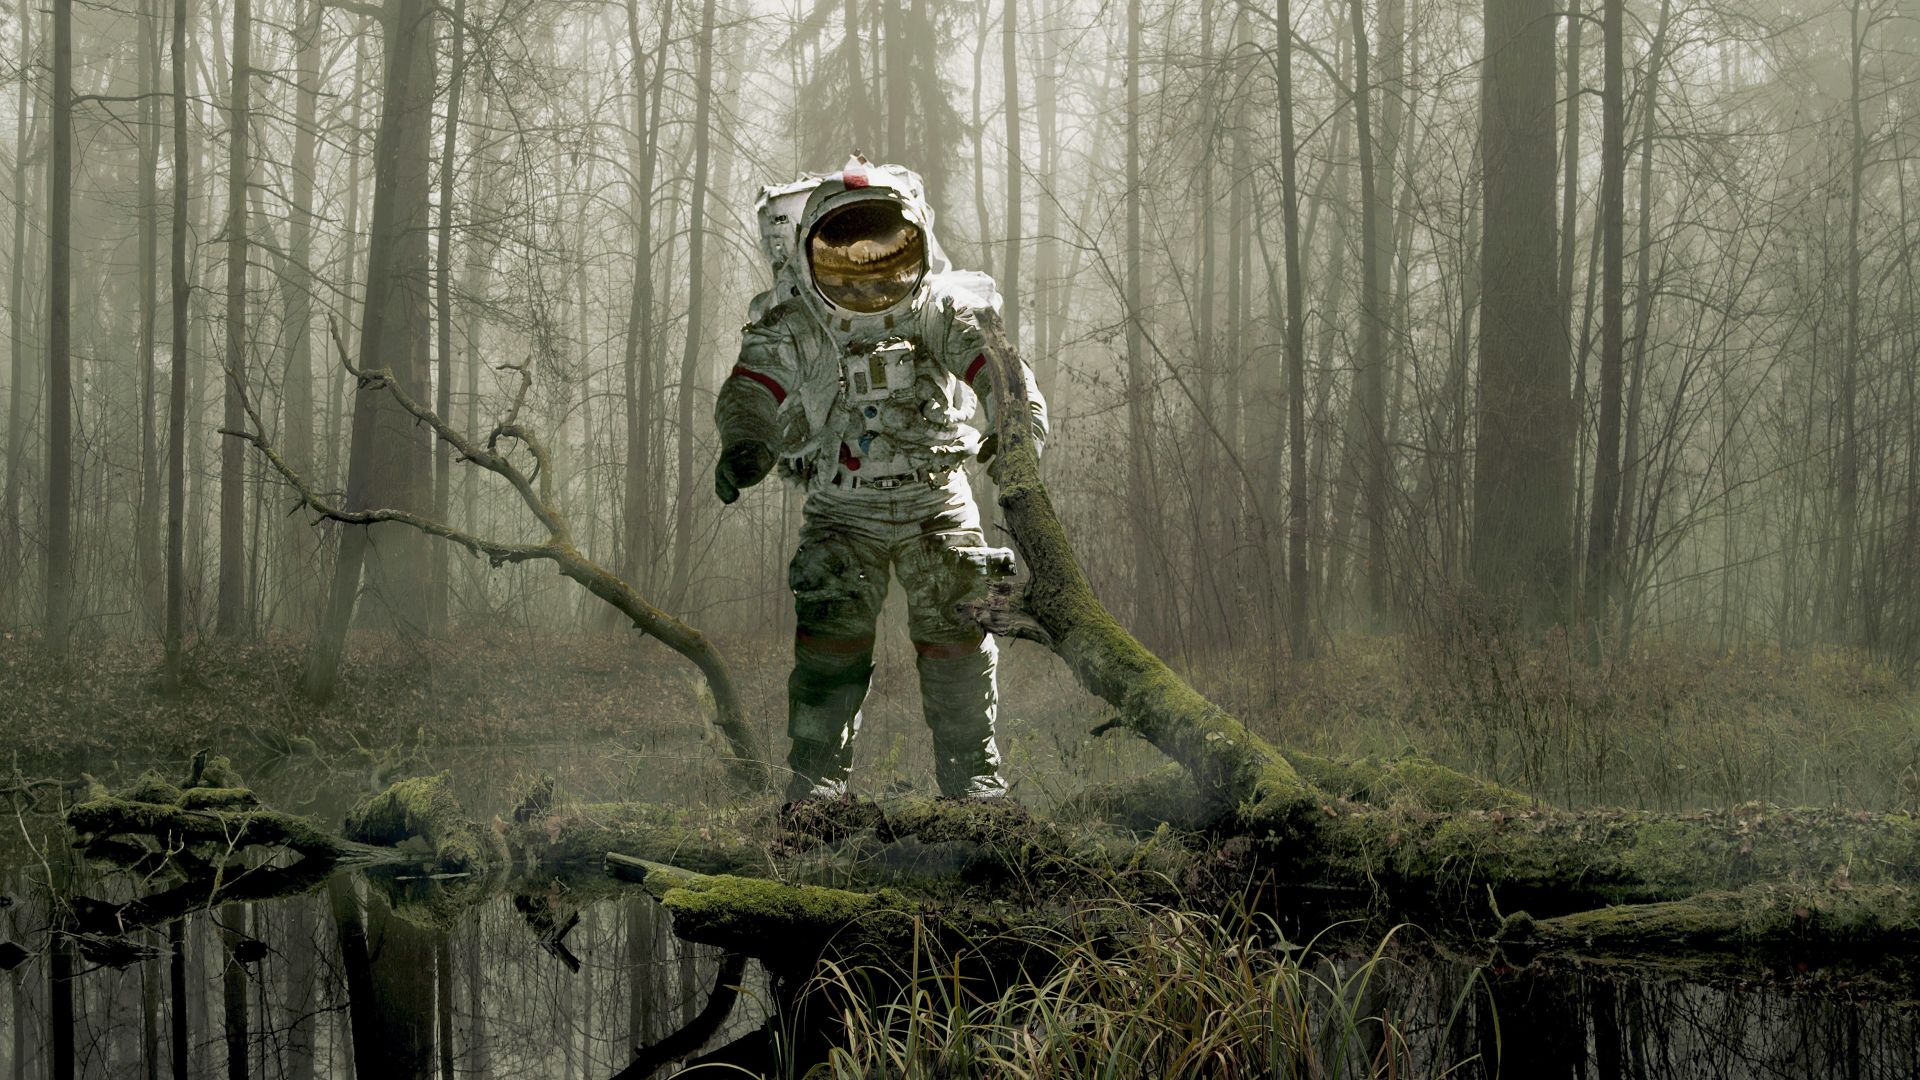 Wallpaper Astronaut, forest, earth, space suit, 4k